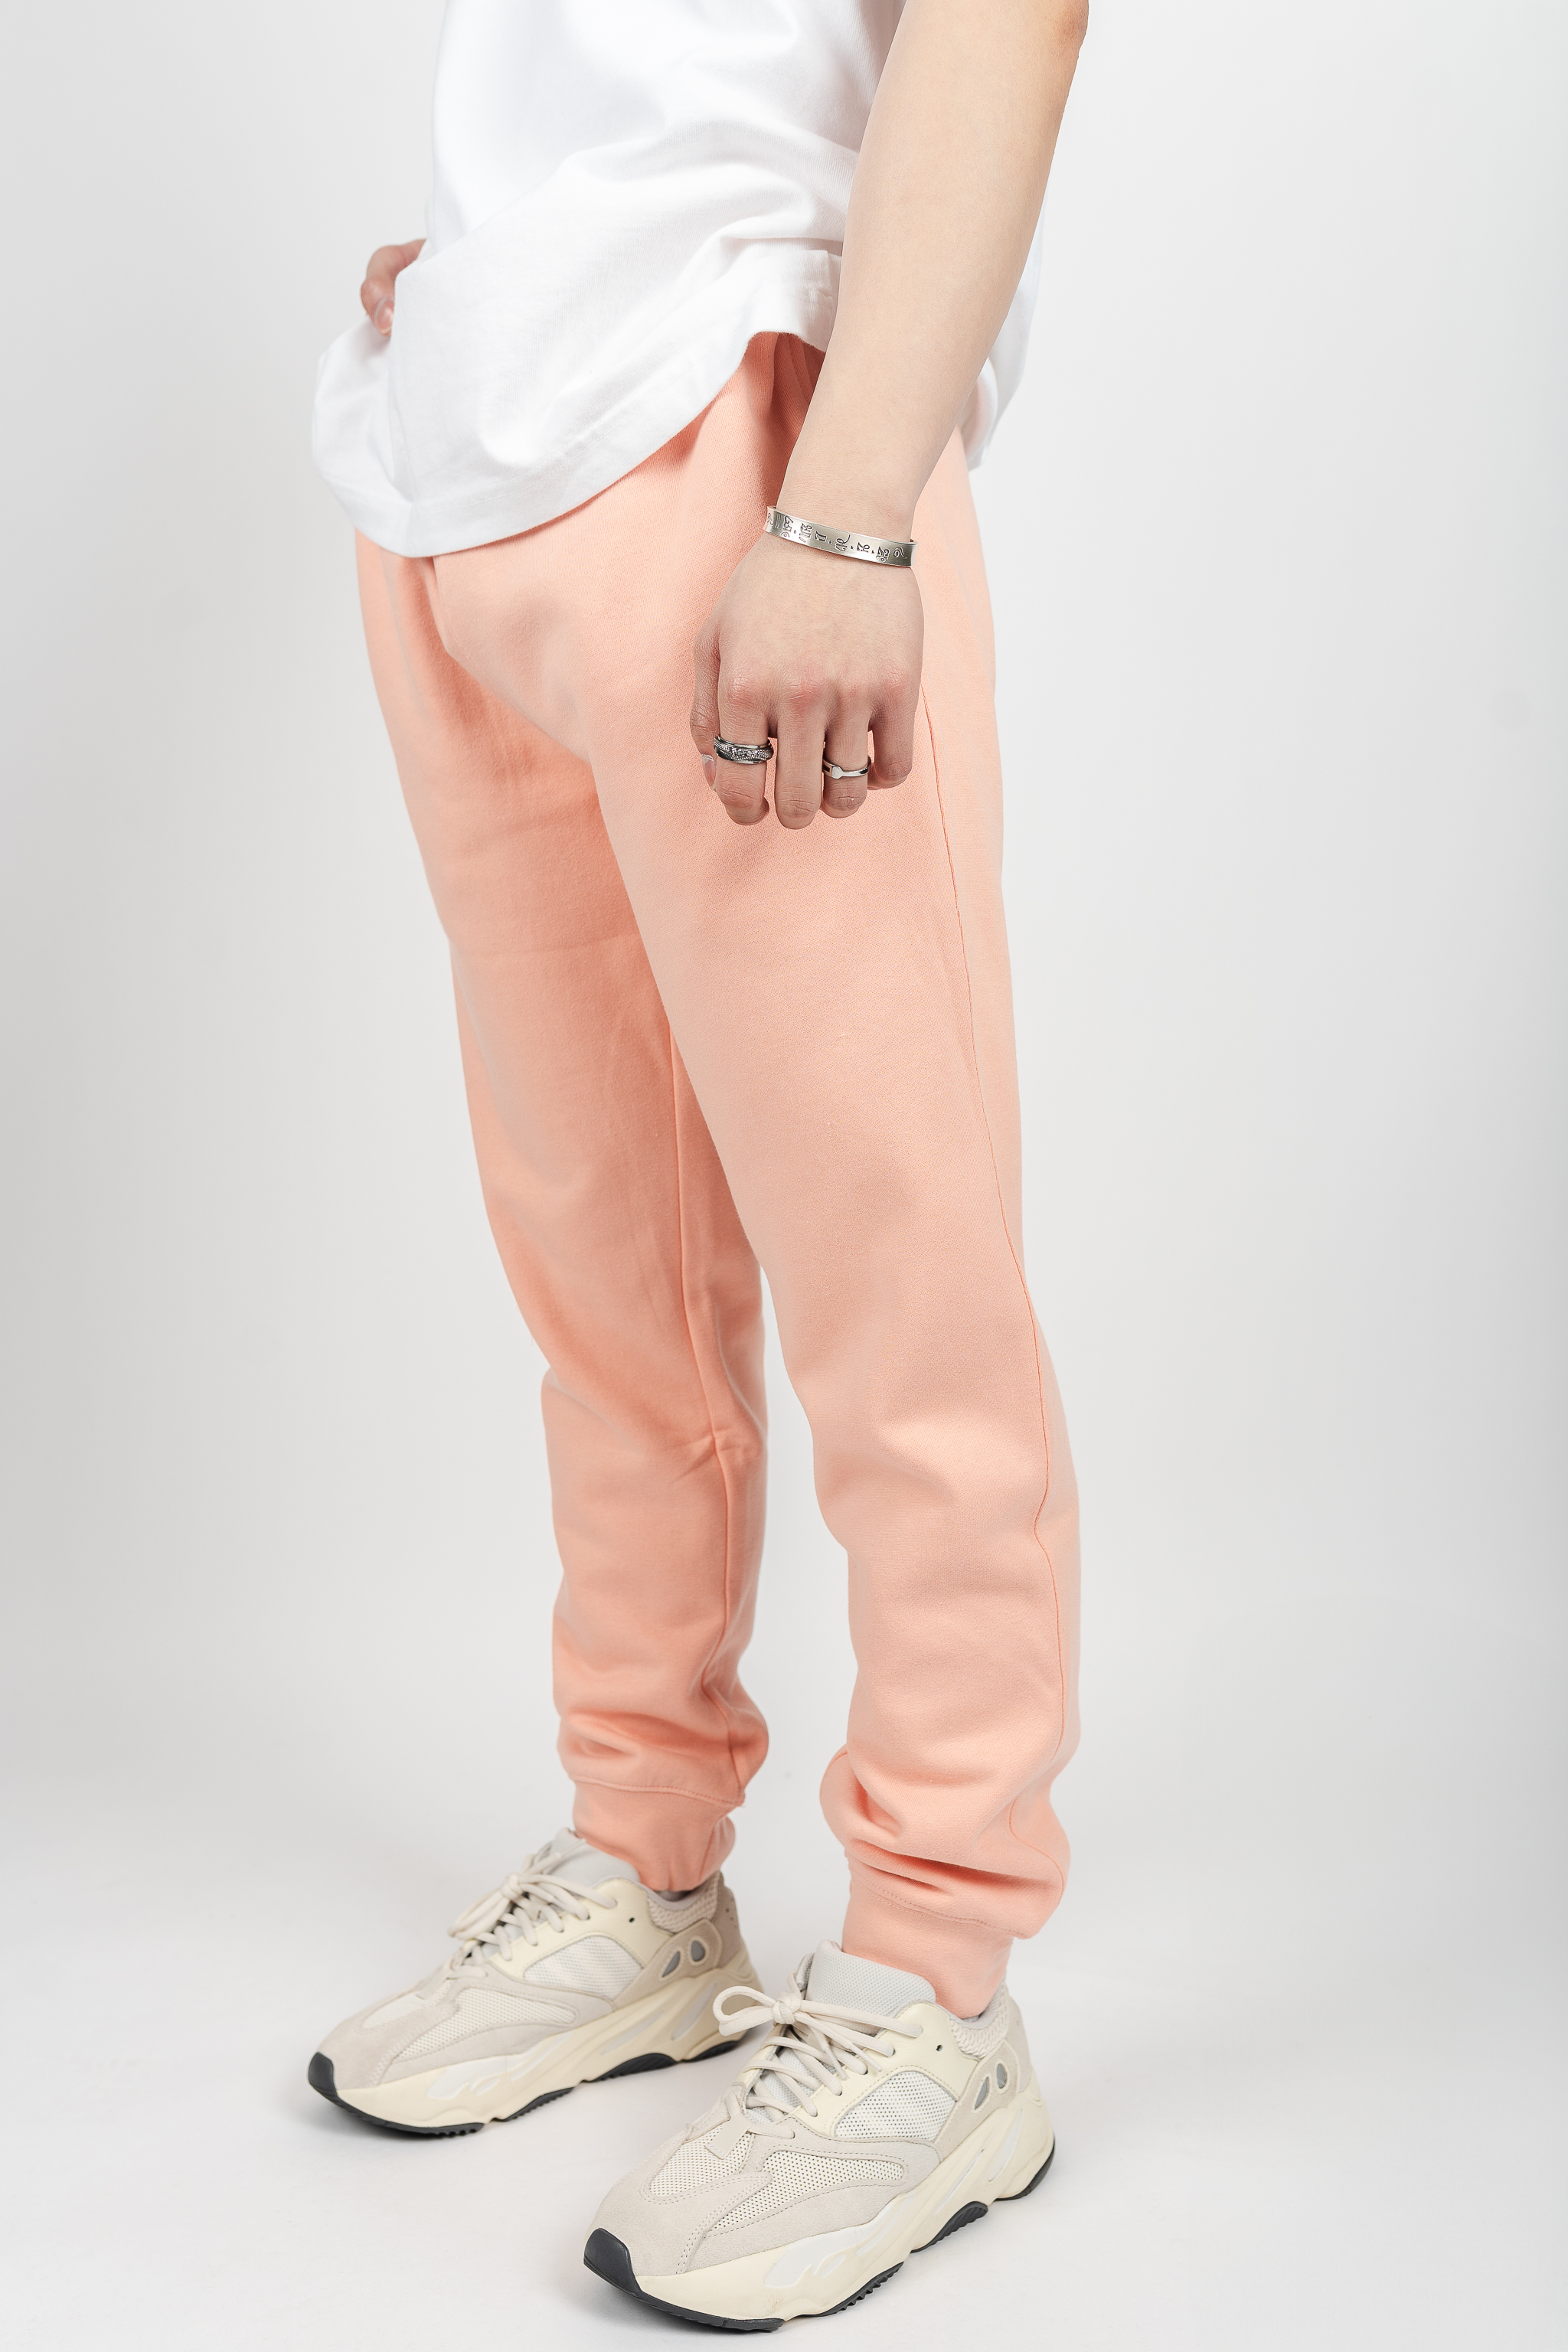 Champion® The Reverse Weave Jogger - Women's Pants in Certain Peach